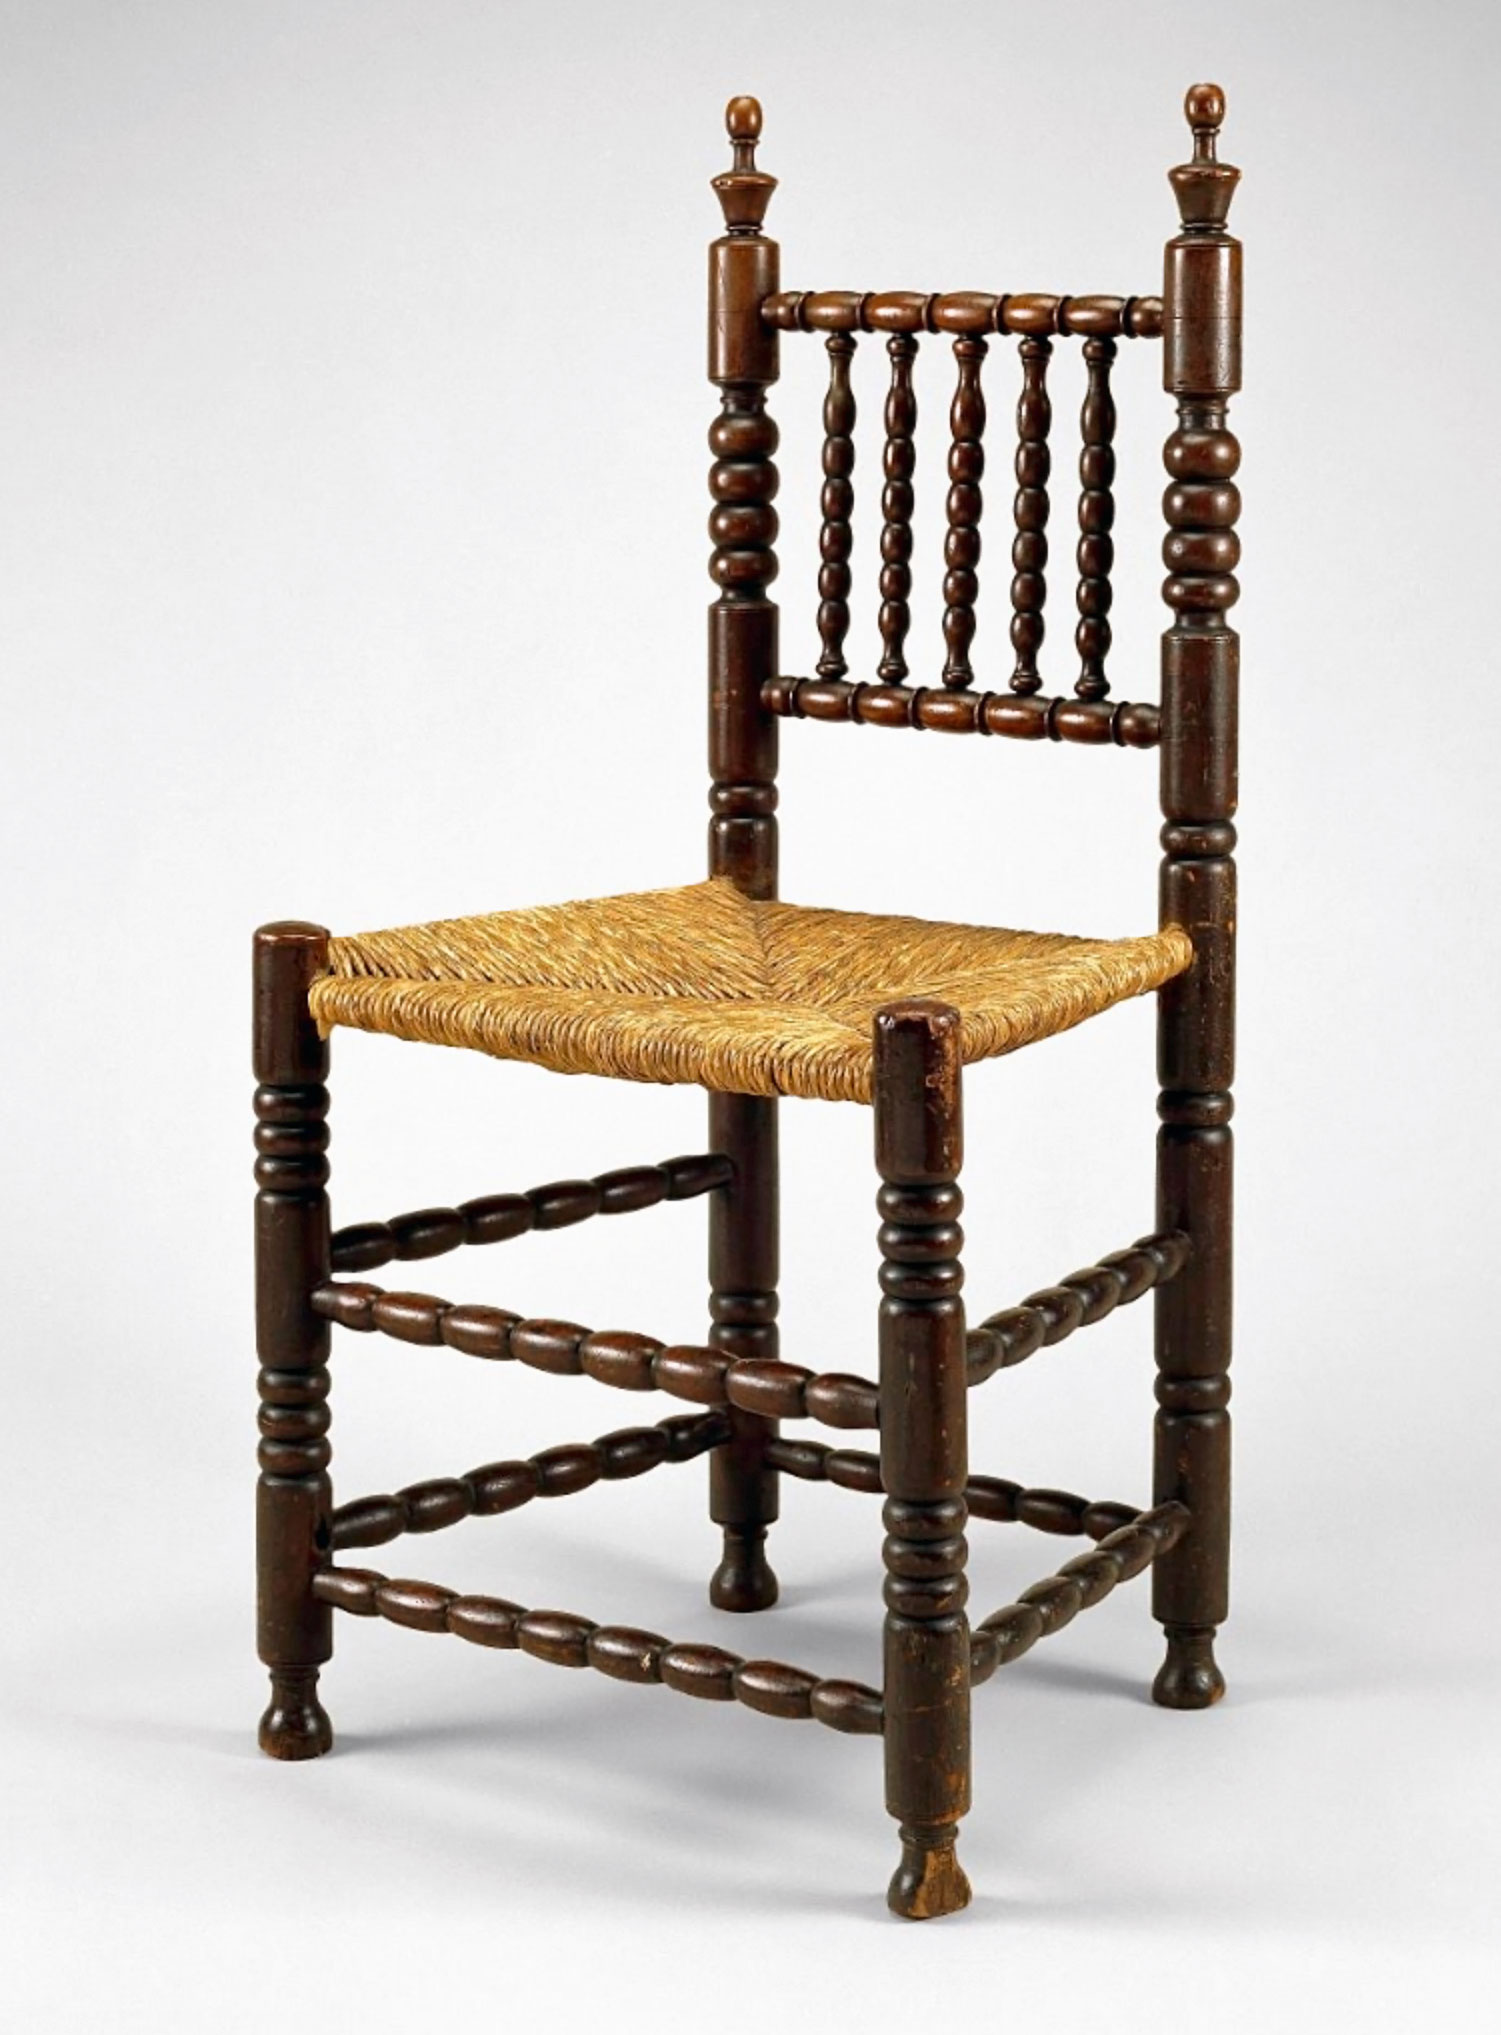 Side chair, New York or New Jersey, 1660–1700, Cherry with unknown secondary woods, Ht. 35 7⁄8 in., Wd. 18 3⁄8 in., D. 15 in. Museum of Fine Arts, Houston, The Bayou Bend Collection, Museum purchase funded by Houston Junior Woman’s Club. B.97.6